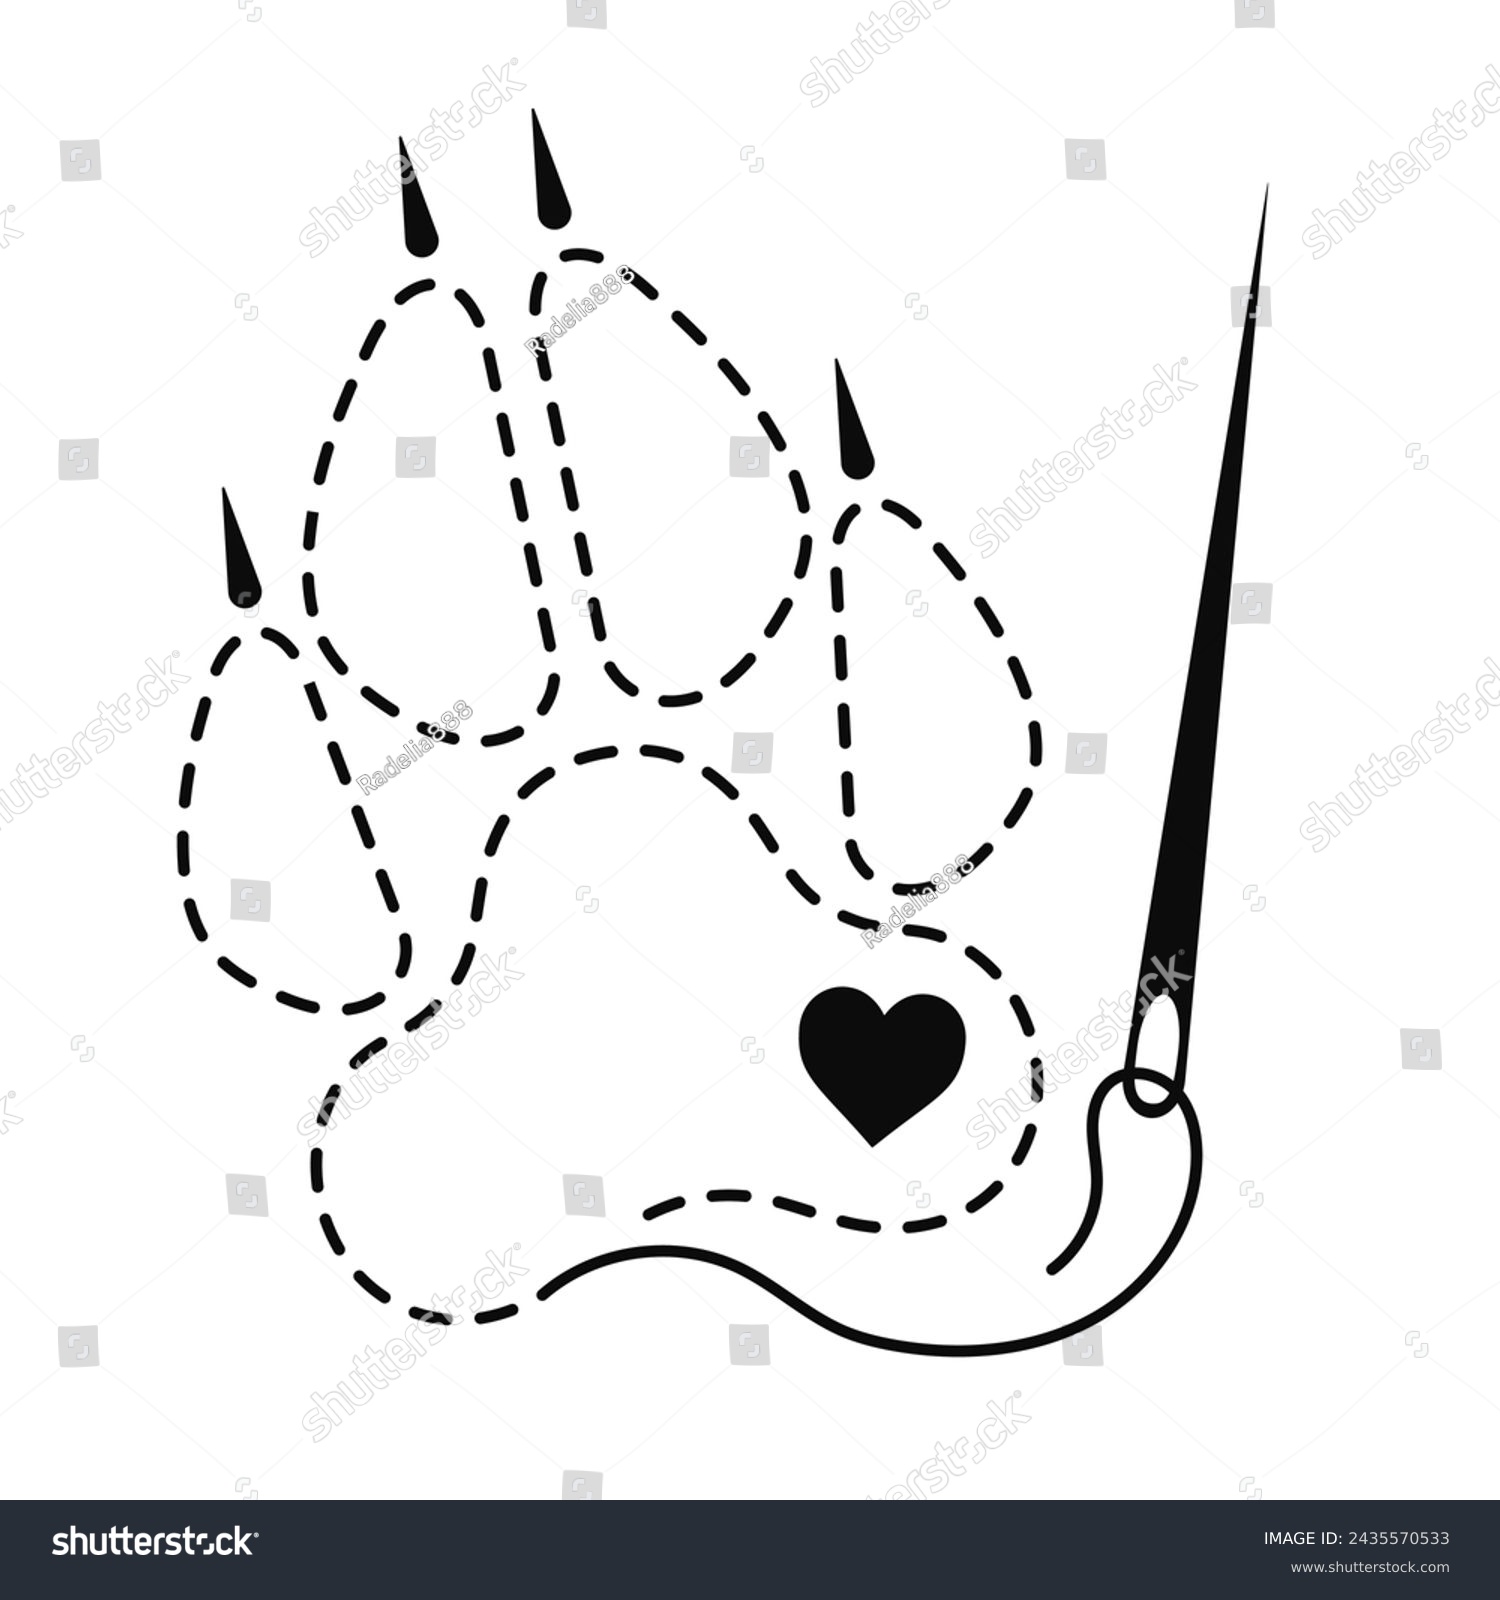 SVG of Silhouette of wolf paw with interrupted contour and heart. Vector illustration of handmade work with embroidery thread and sewing needle on white background.	 svg